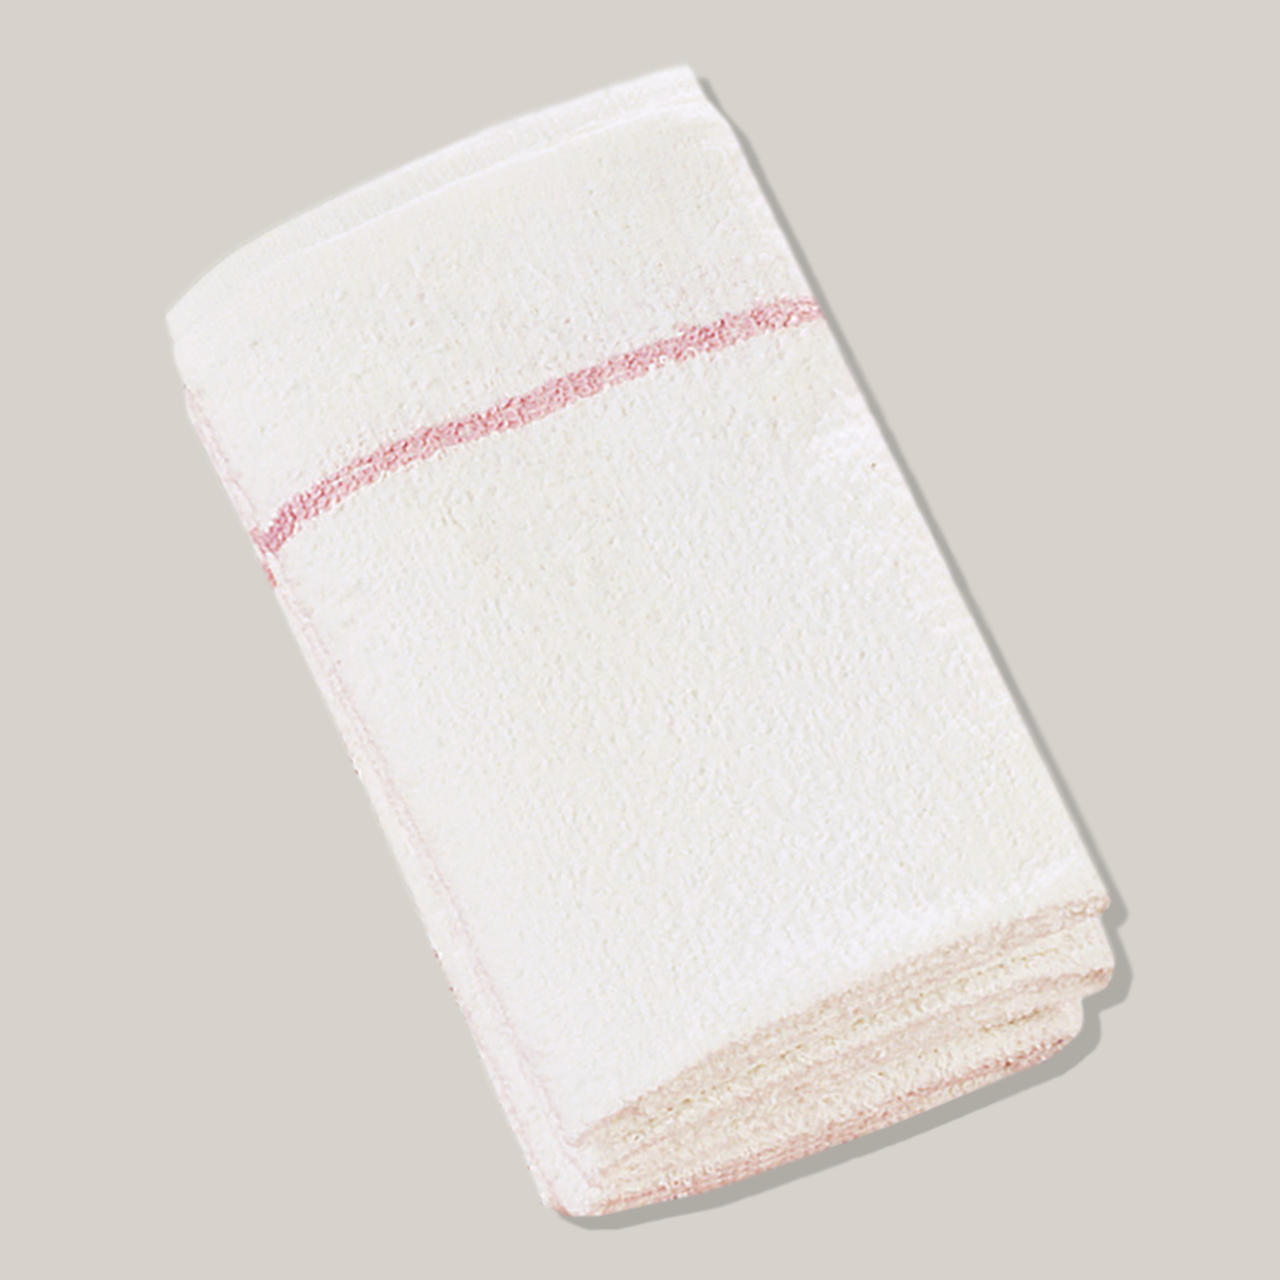 Dannyco (12/pk) White Towels With Pink Stripe #TOWEL1C 